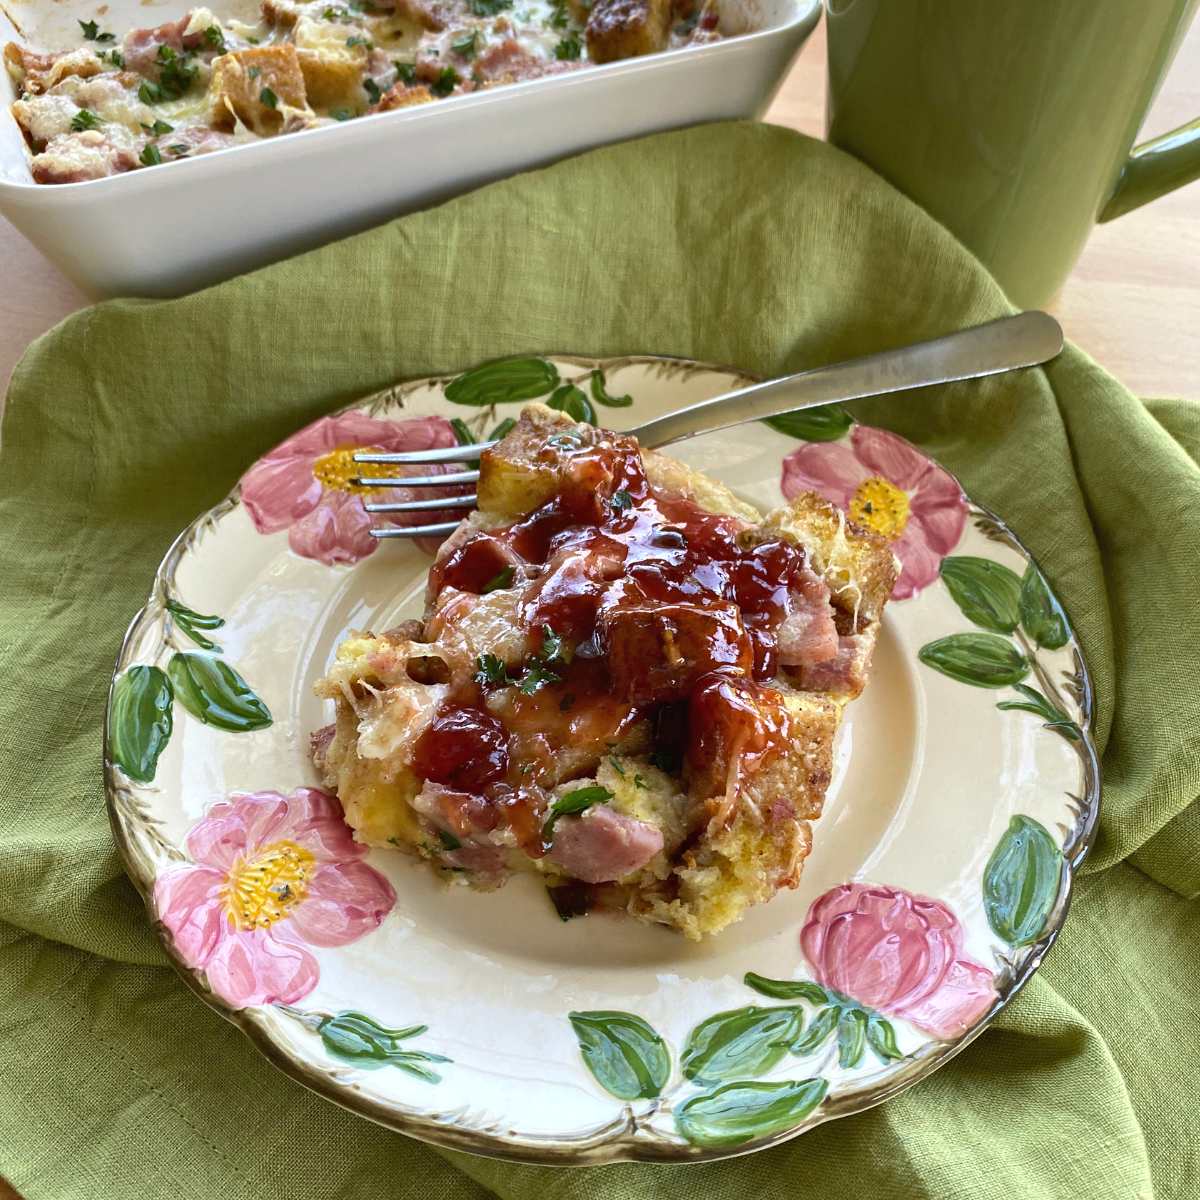 Serving of Monte Cristo casserole on a plate with casserole dish behind it.